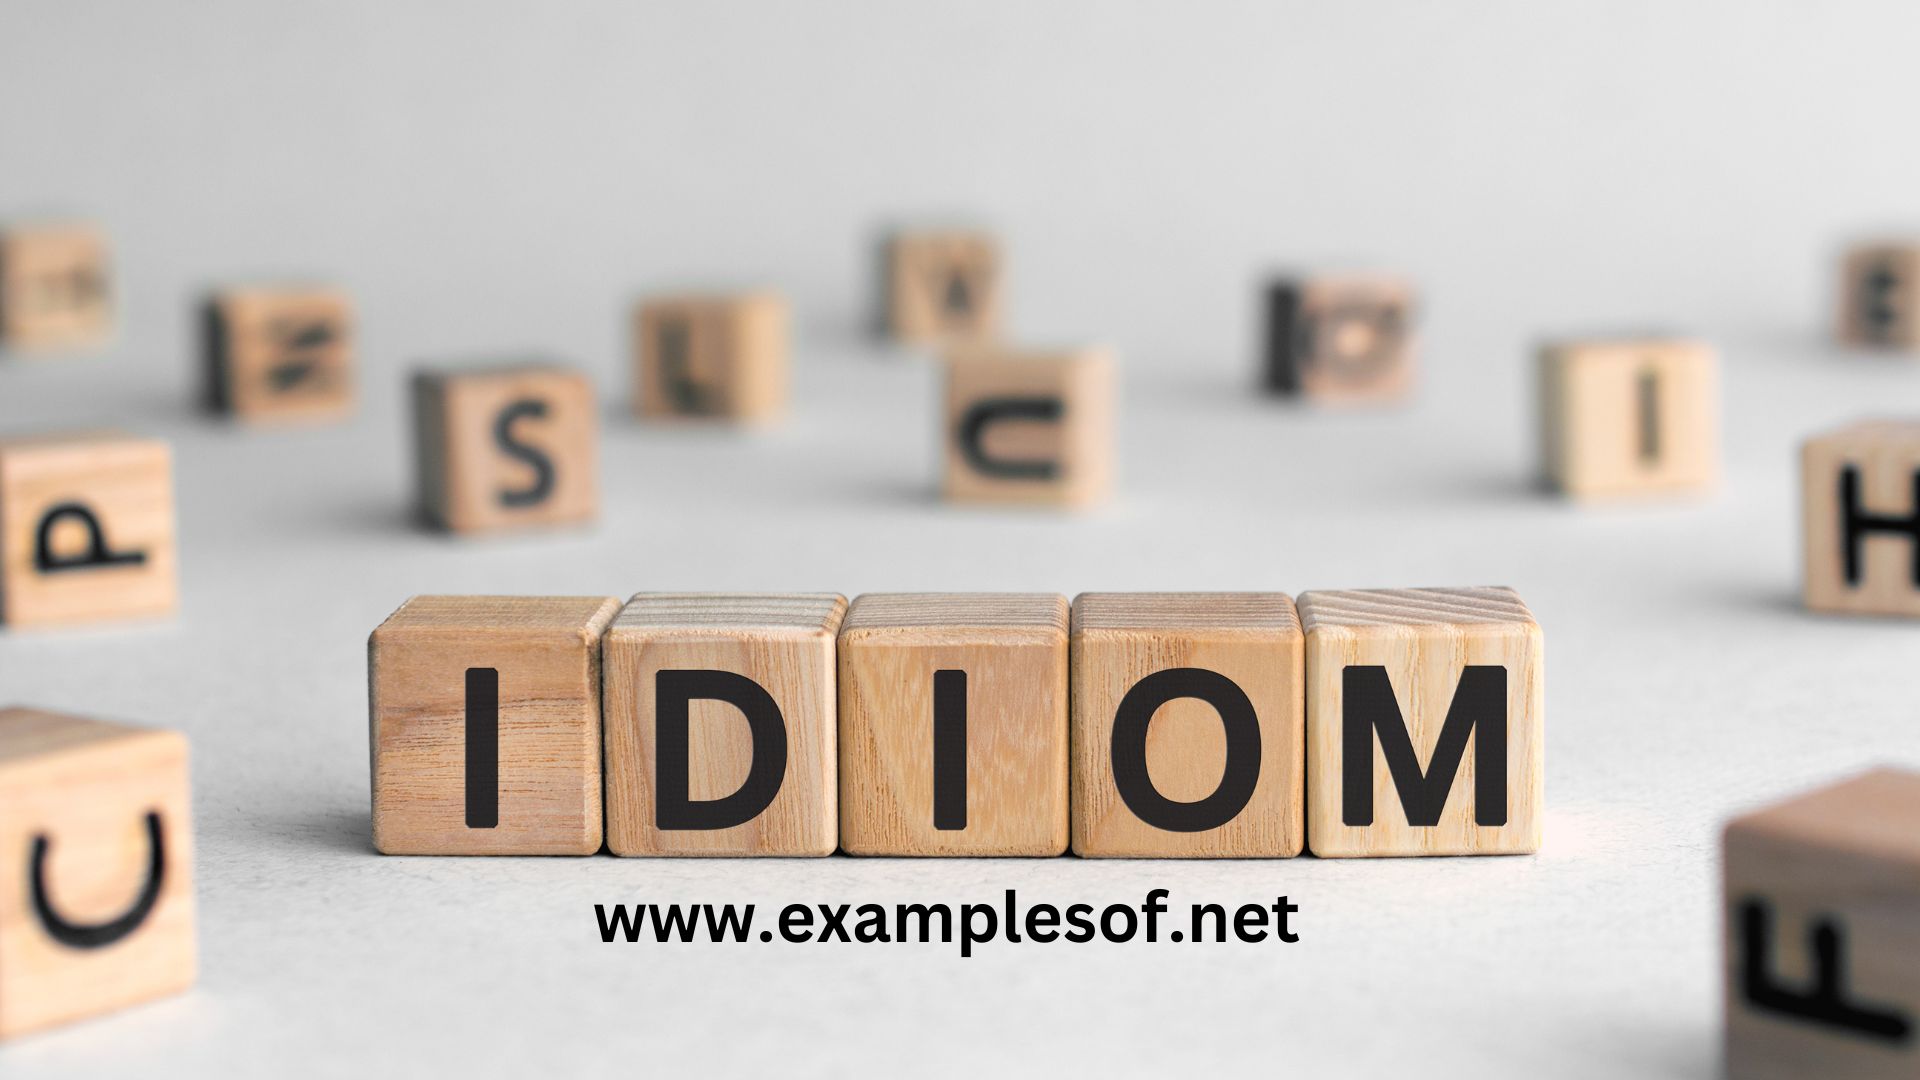 125 + Idioms and Phrases for SSC psc Exam  Examples of idioms and their meaning